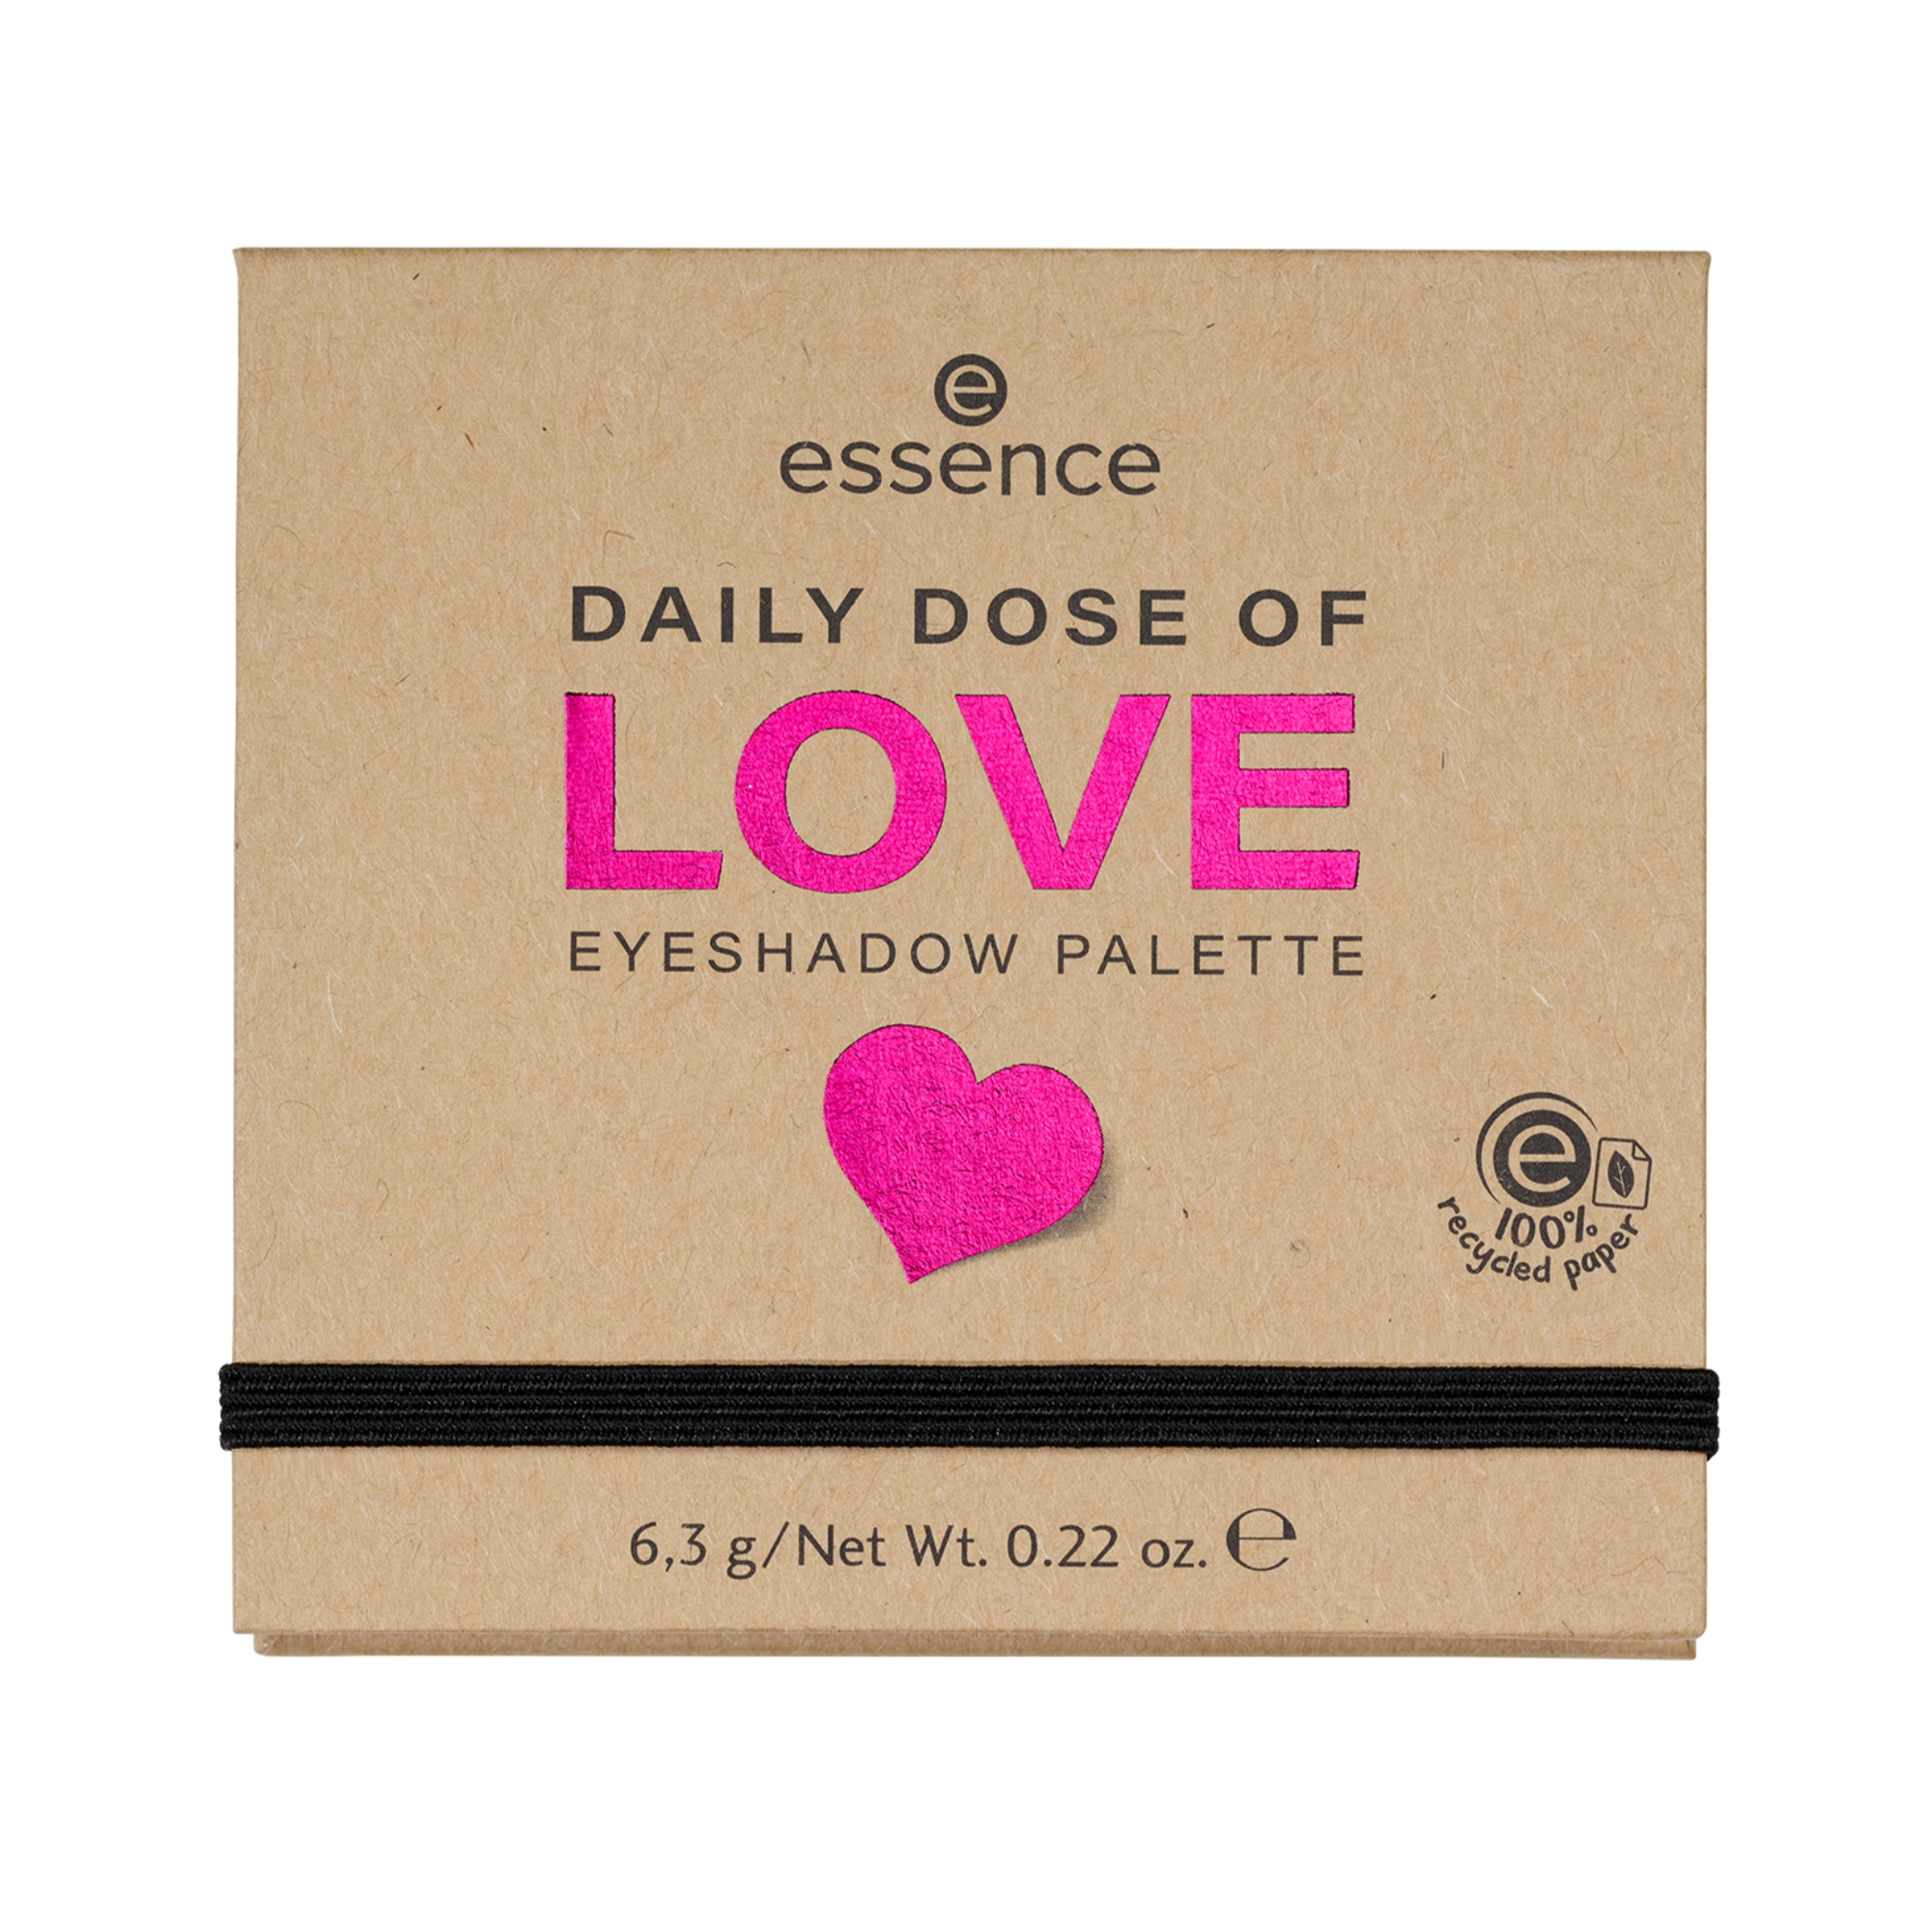 DAILY DOSE OF LOVE EYESHADOW PALETTE